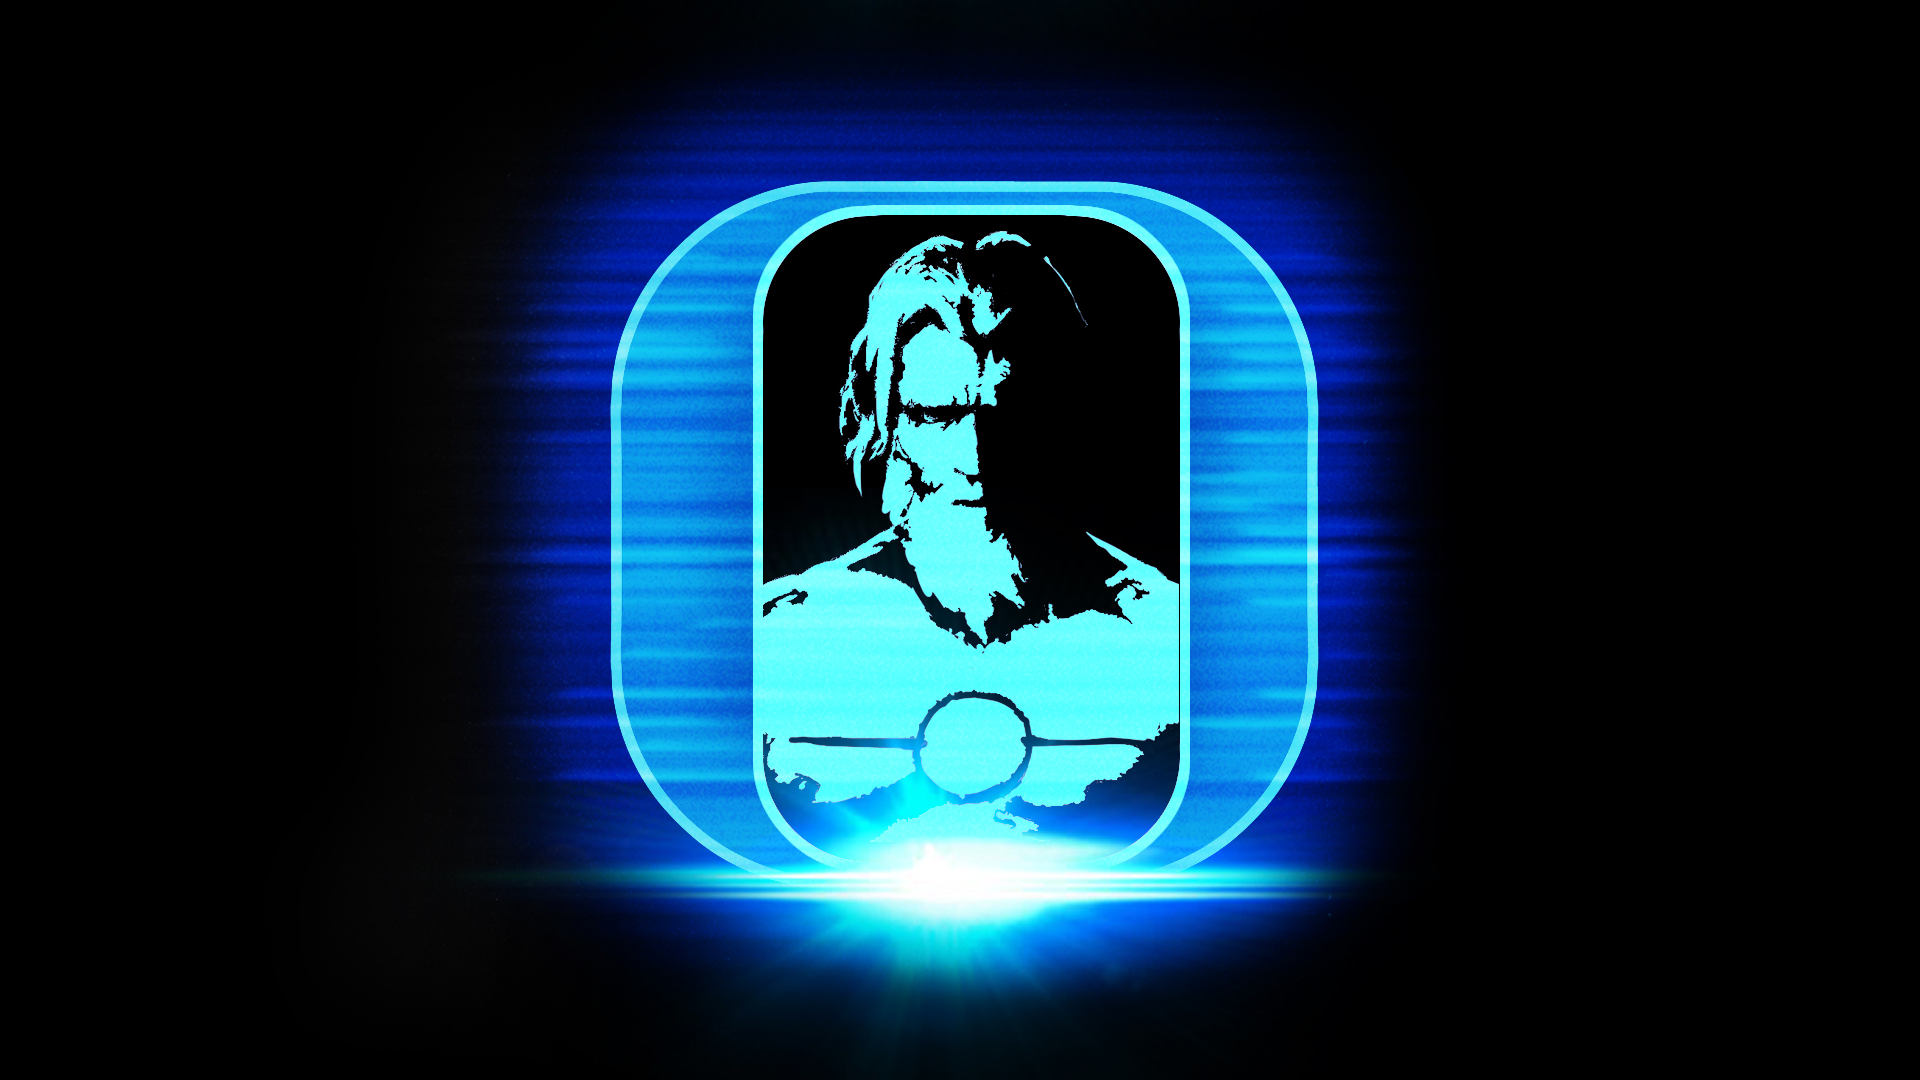 Icon for I Knew He Was No Good